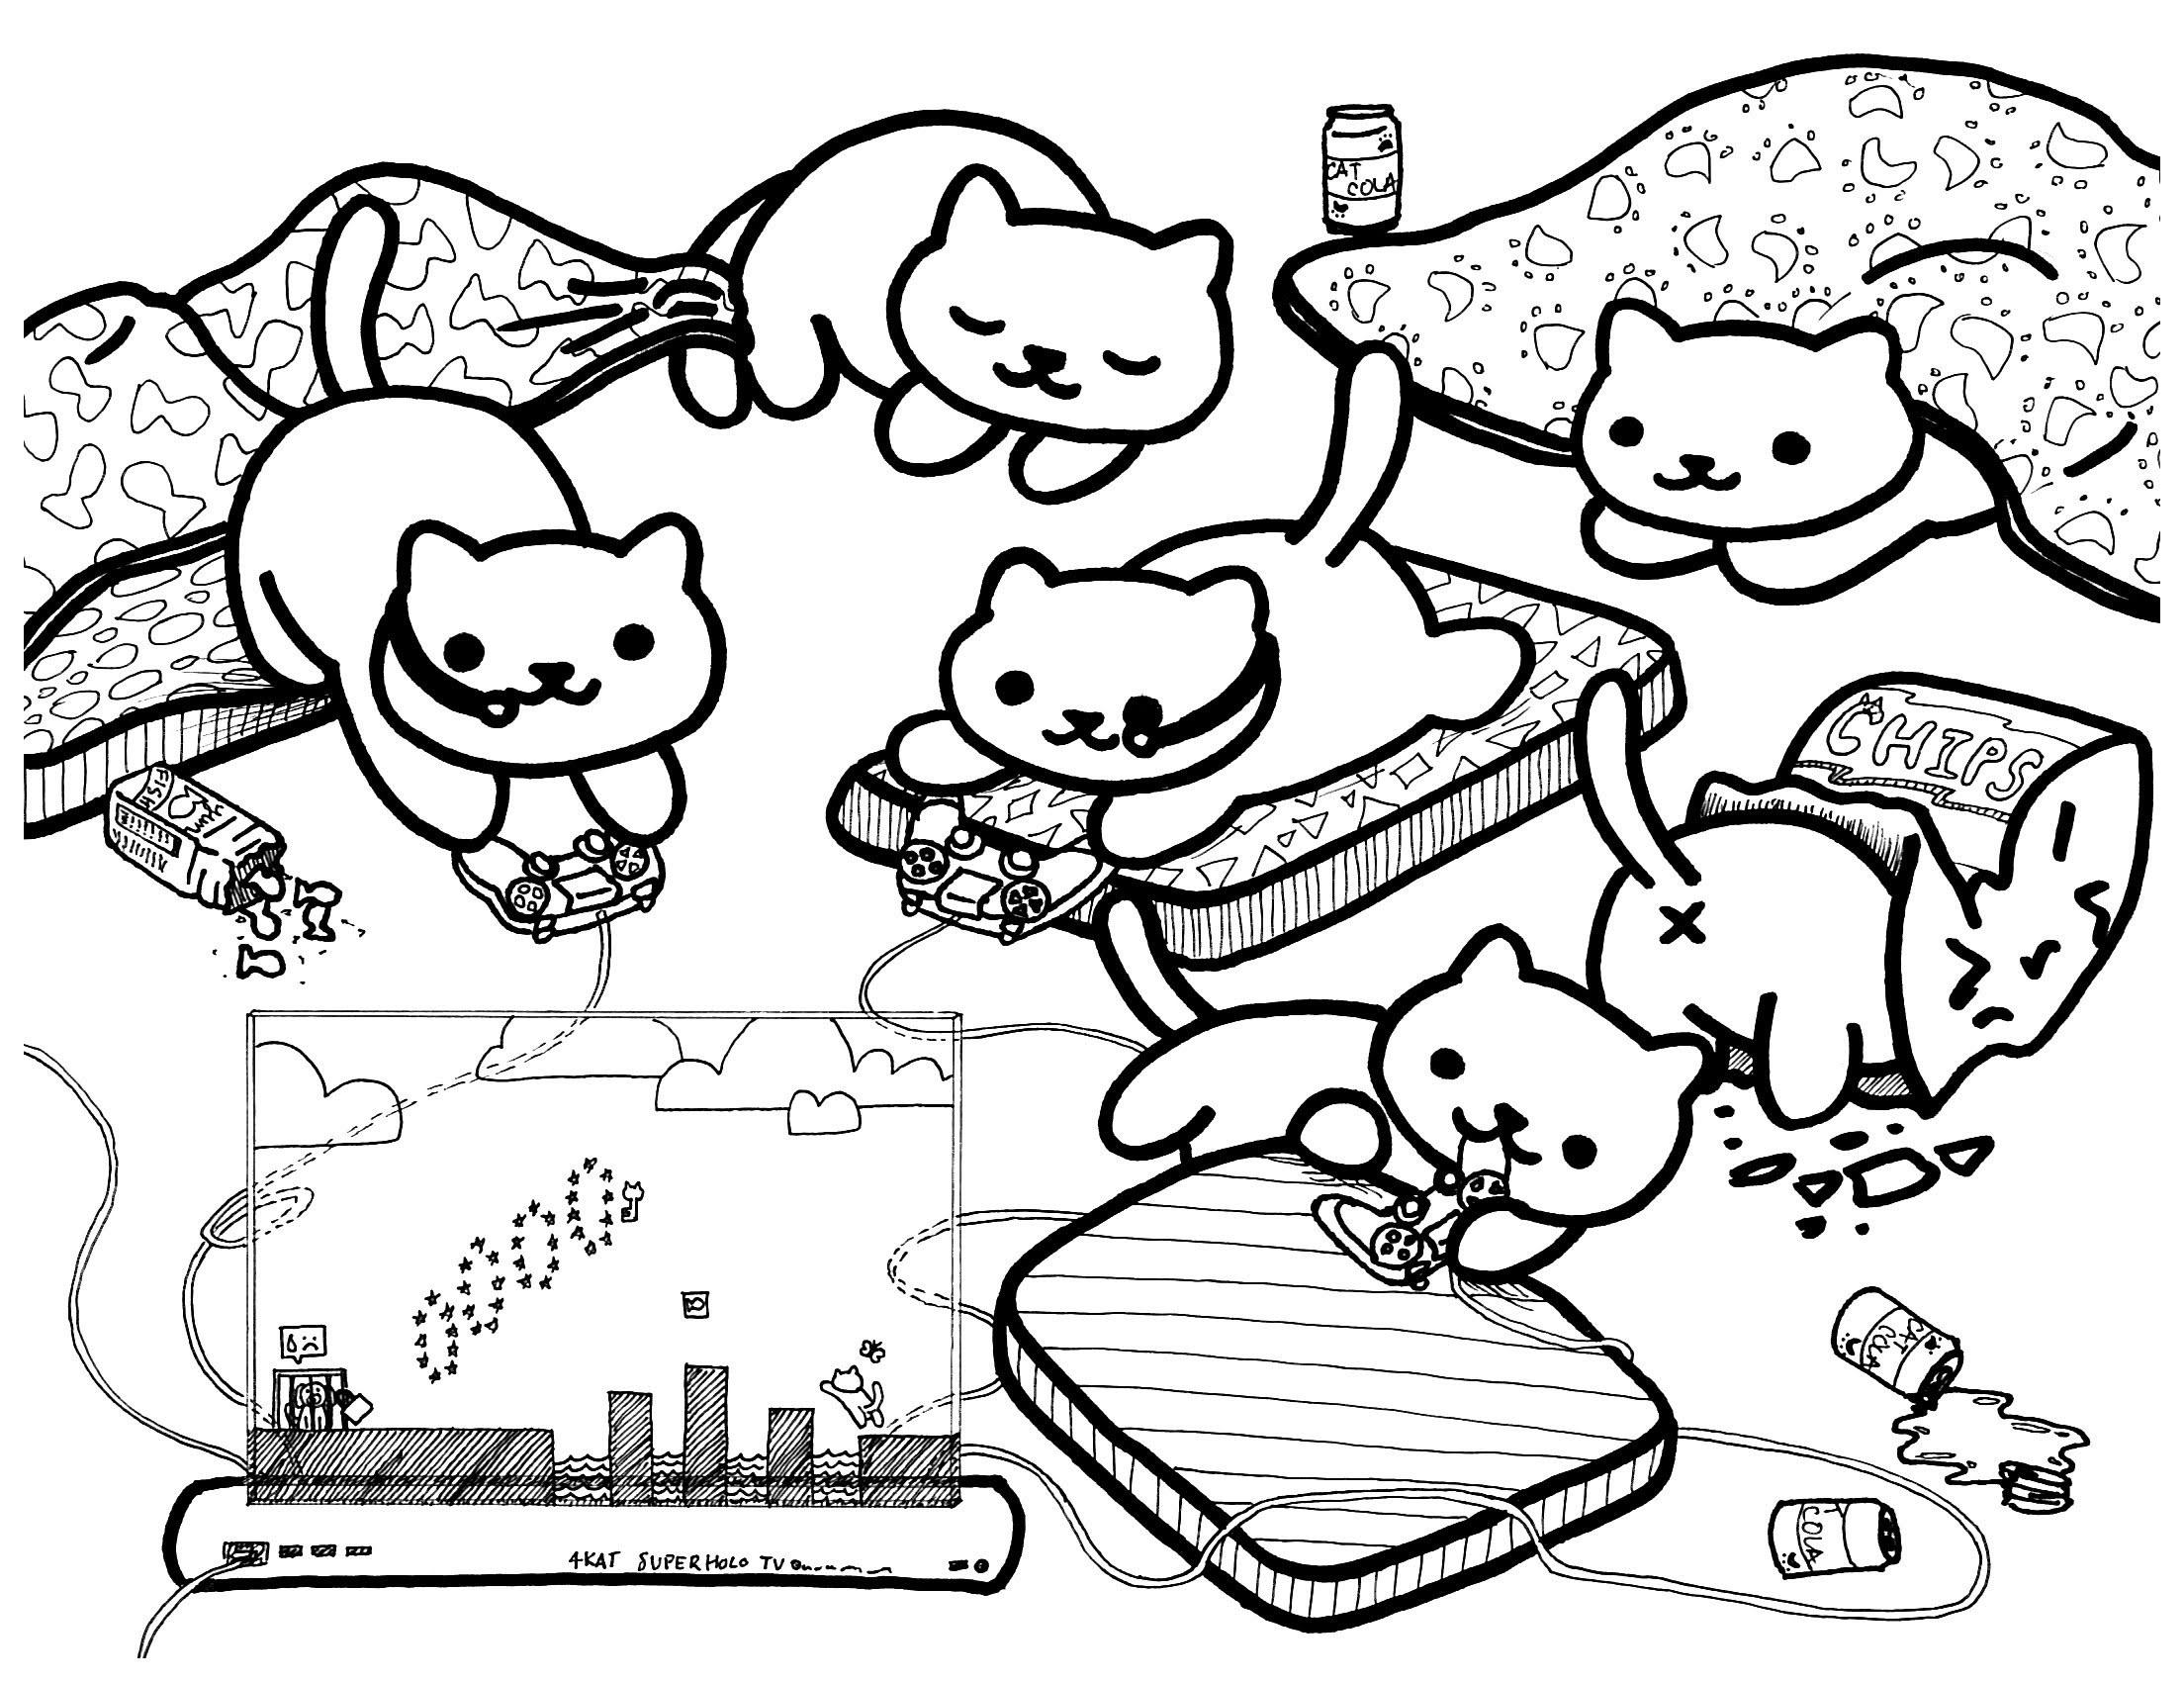 Here's a coloring sheet for all of us in quarantine! : nekoatsume